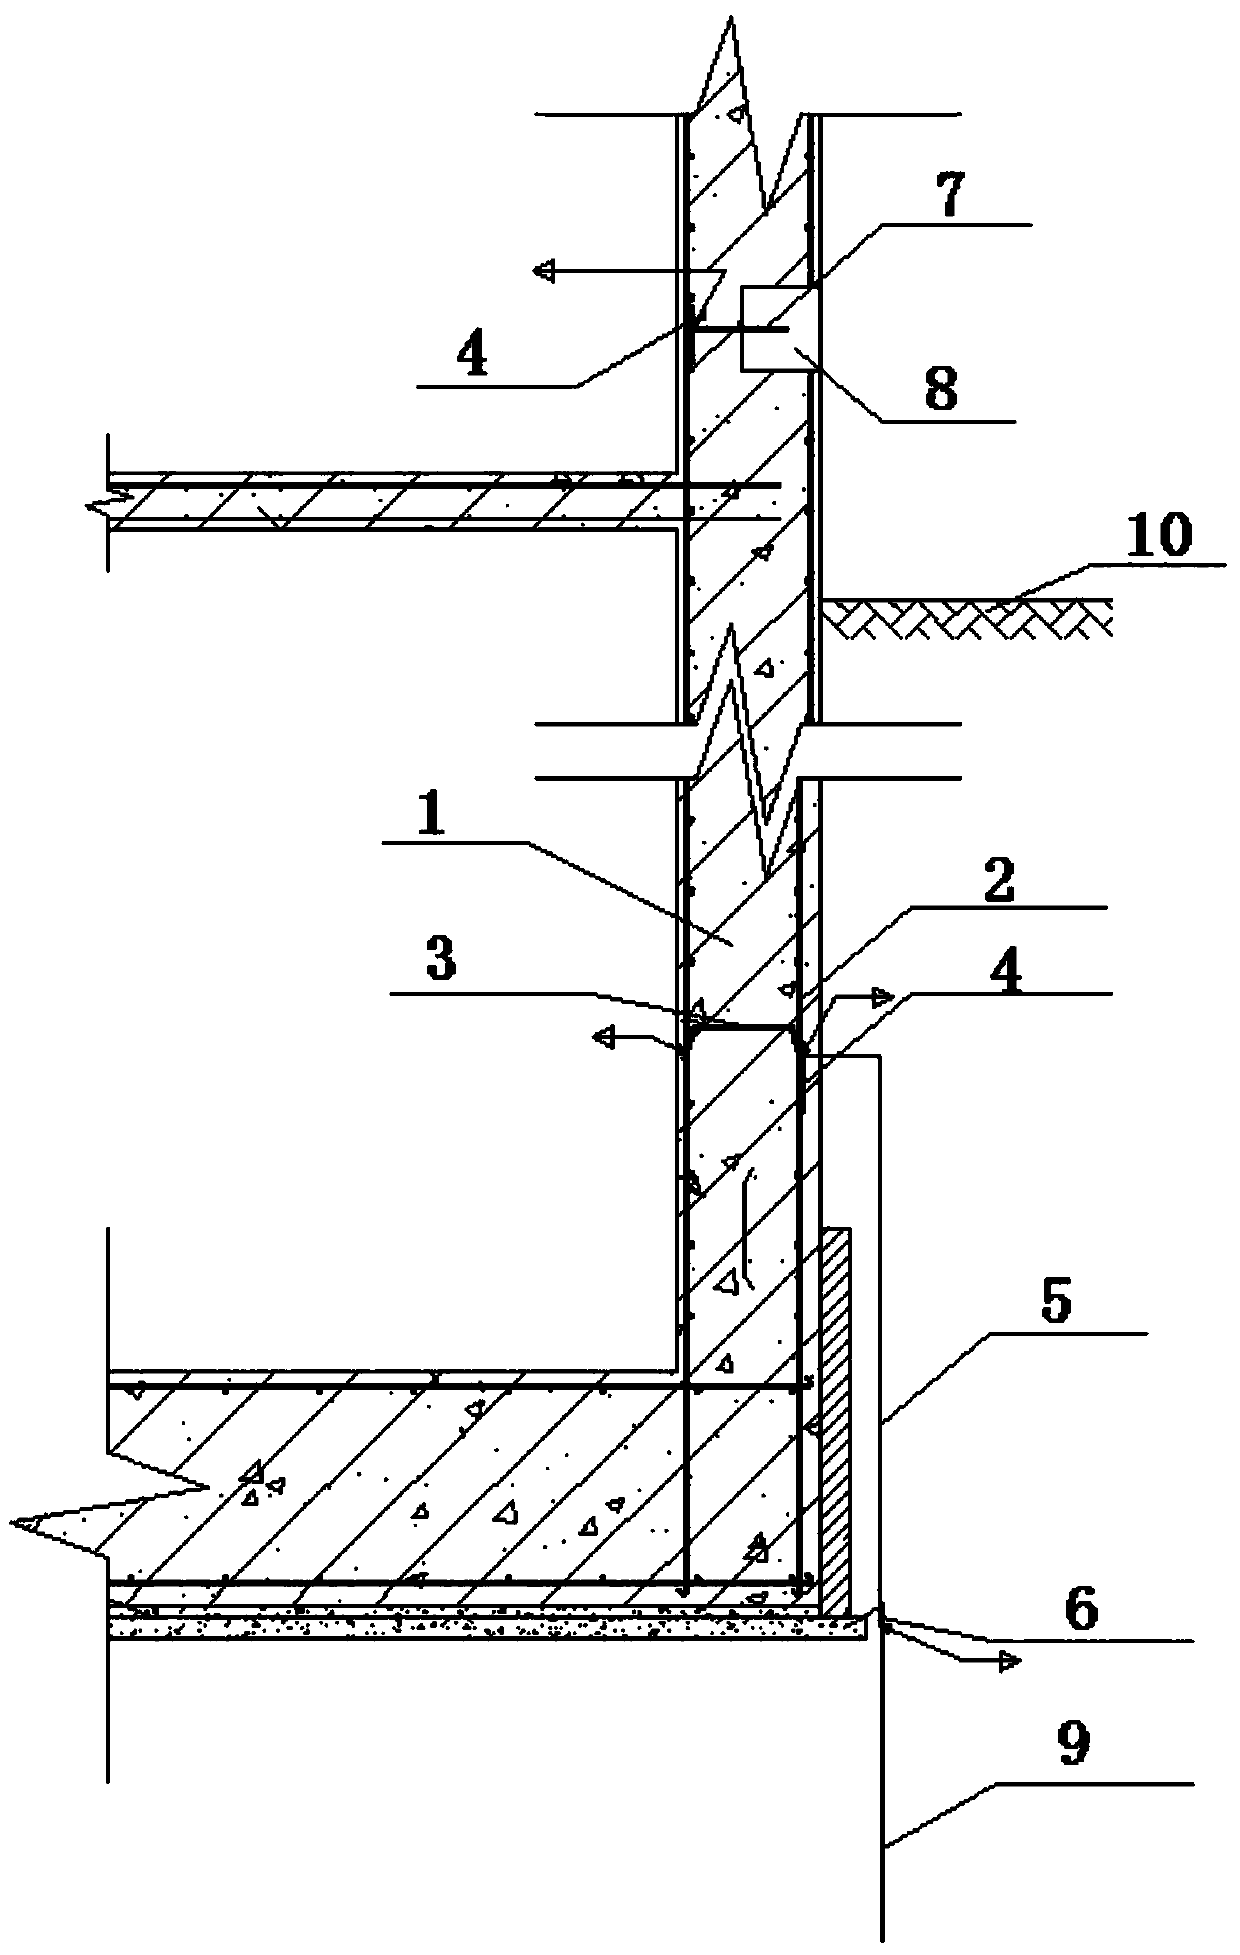 Lightning Protection Artificial Grounding System and Construction Method Using Structural Reinforcement to Externally Connect Down Conductors